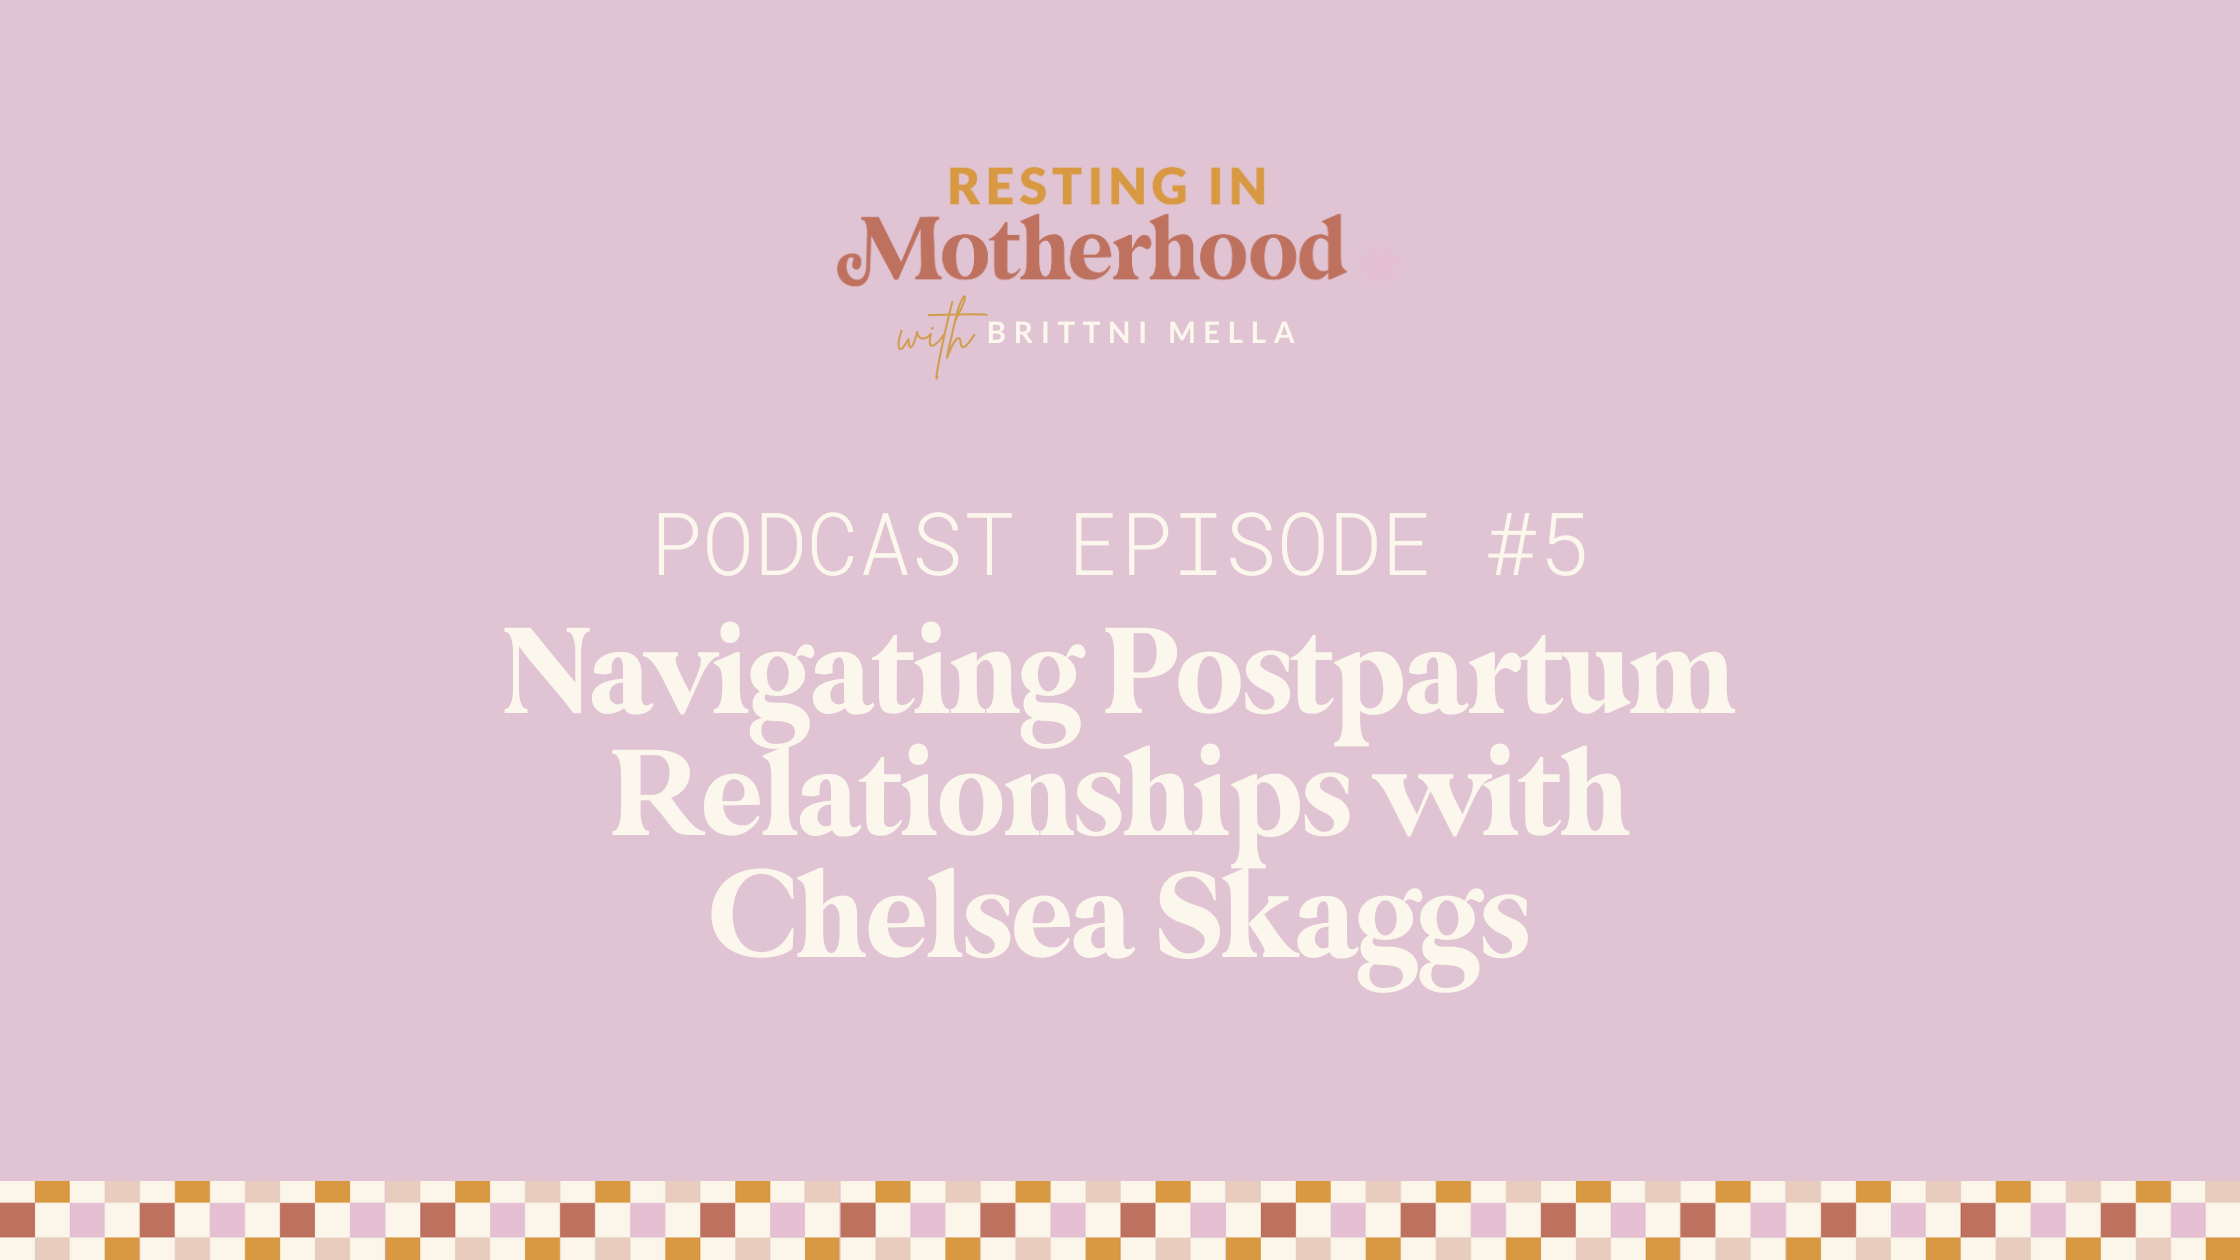 Postpartum Relationships with Chelsea Skaggs